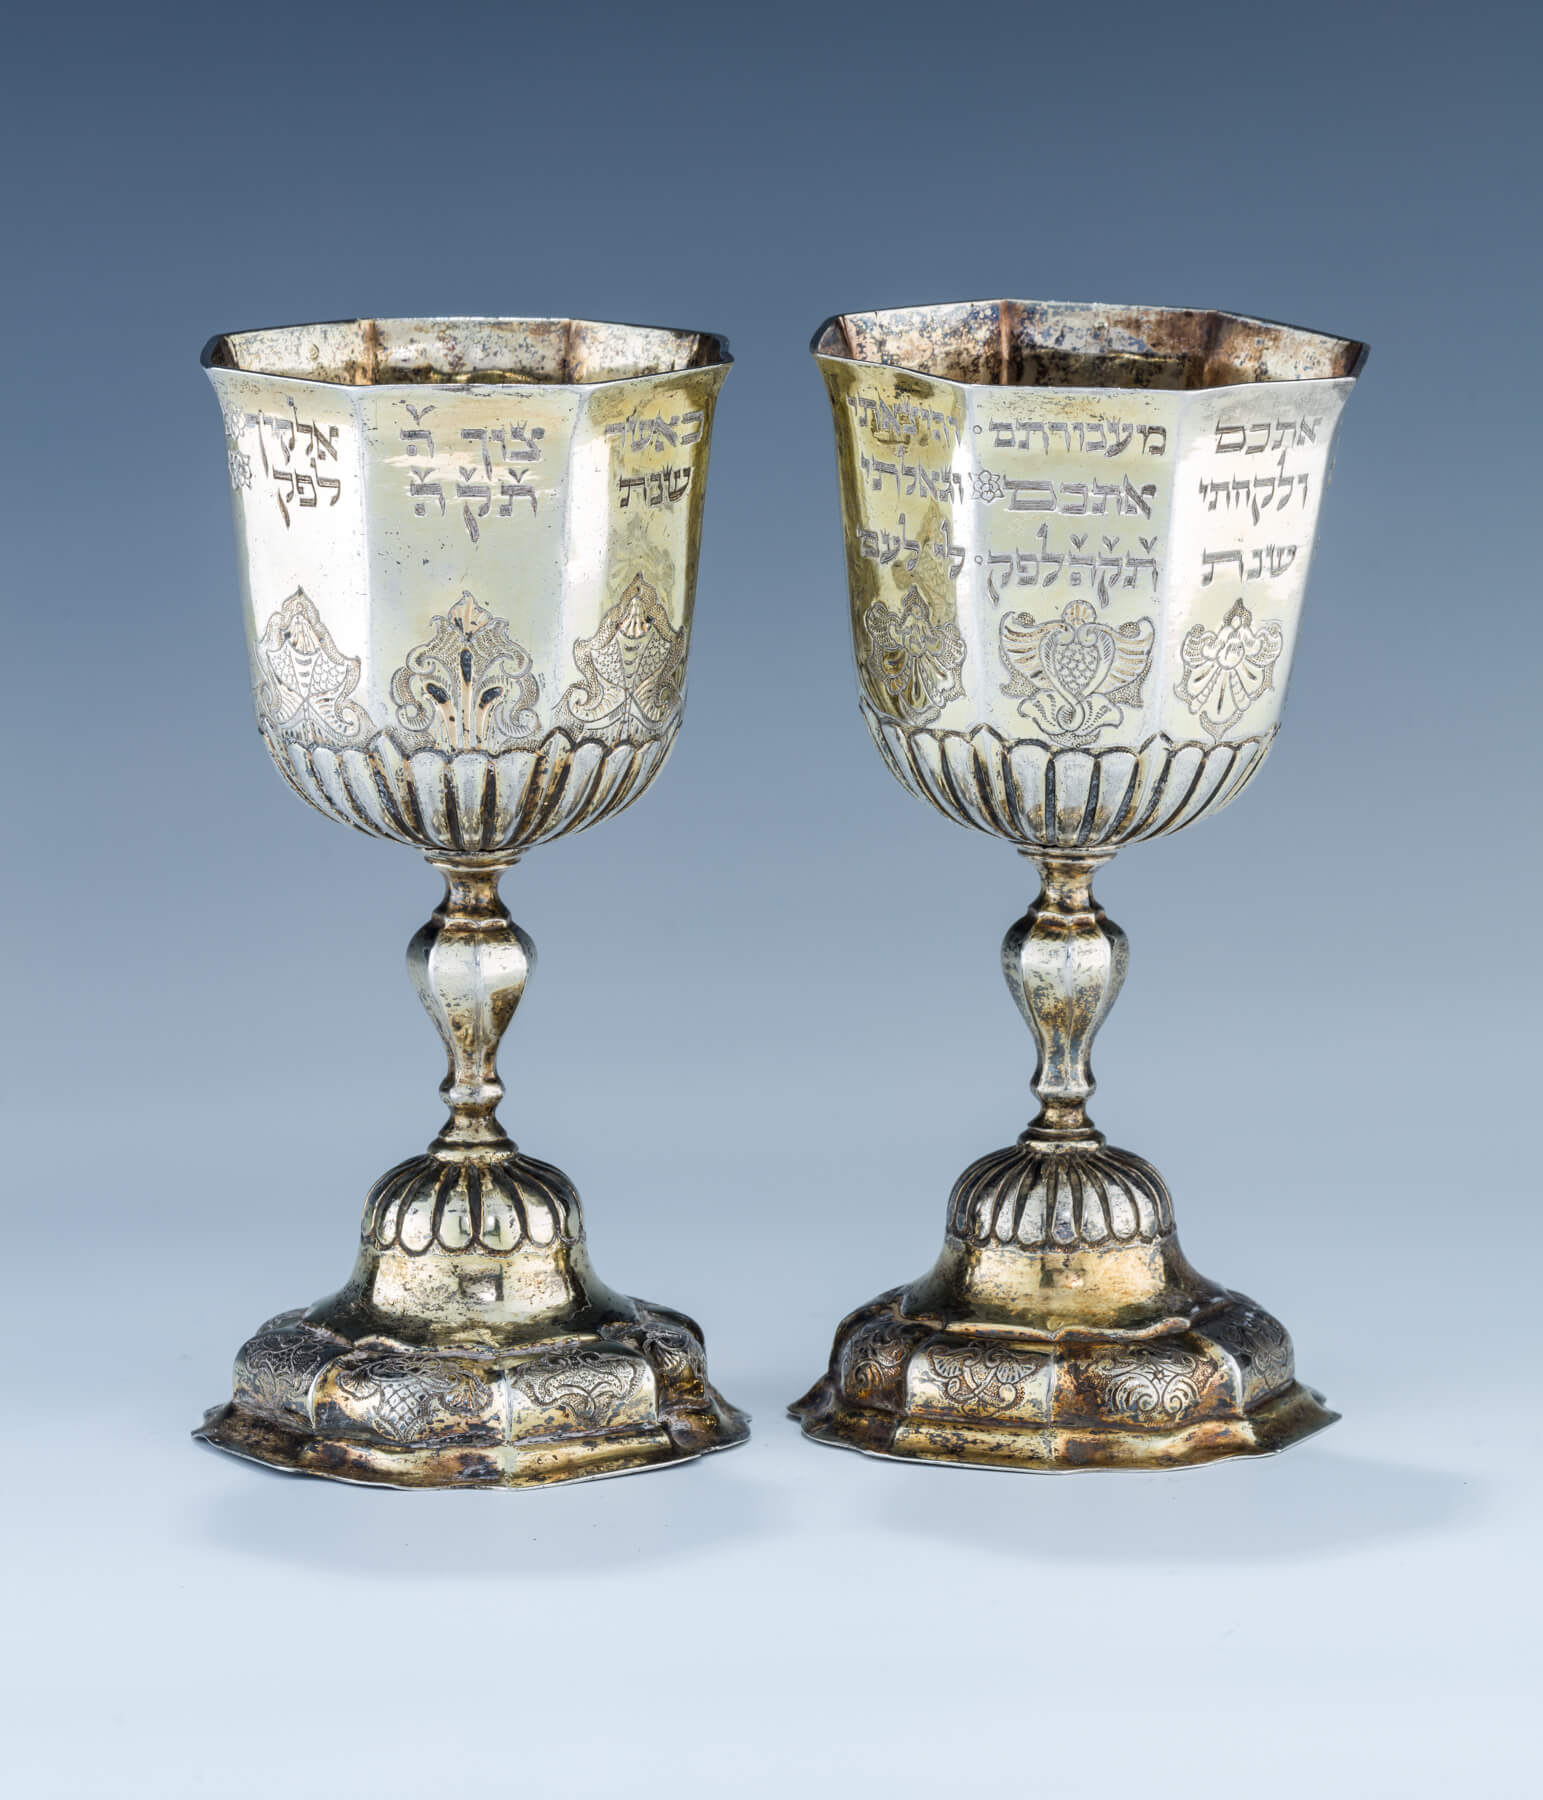 80. An Exceptional Gilded Silver Kiddush Goblet And Passover Goblet By Johann Mittnacht (1706 – 1758)